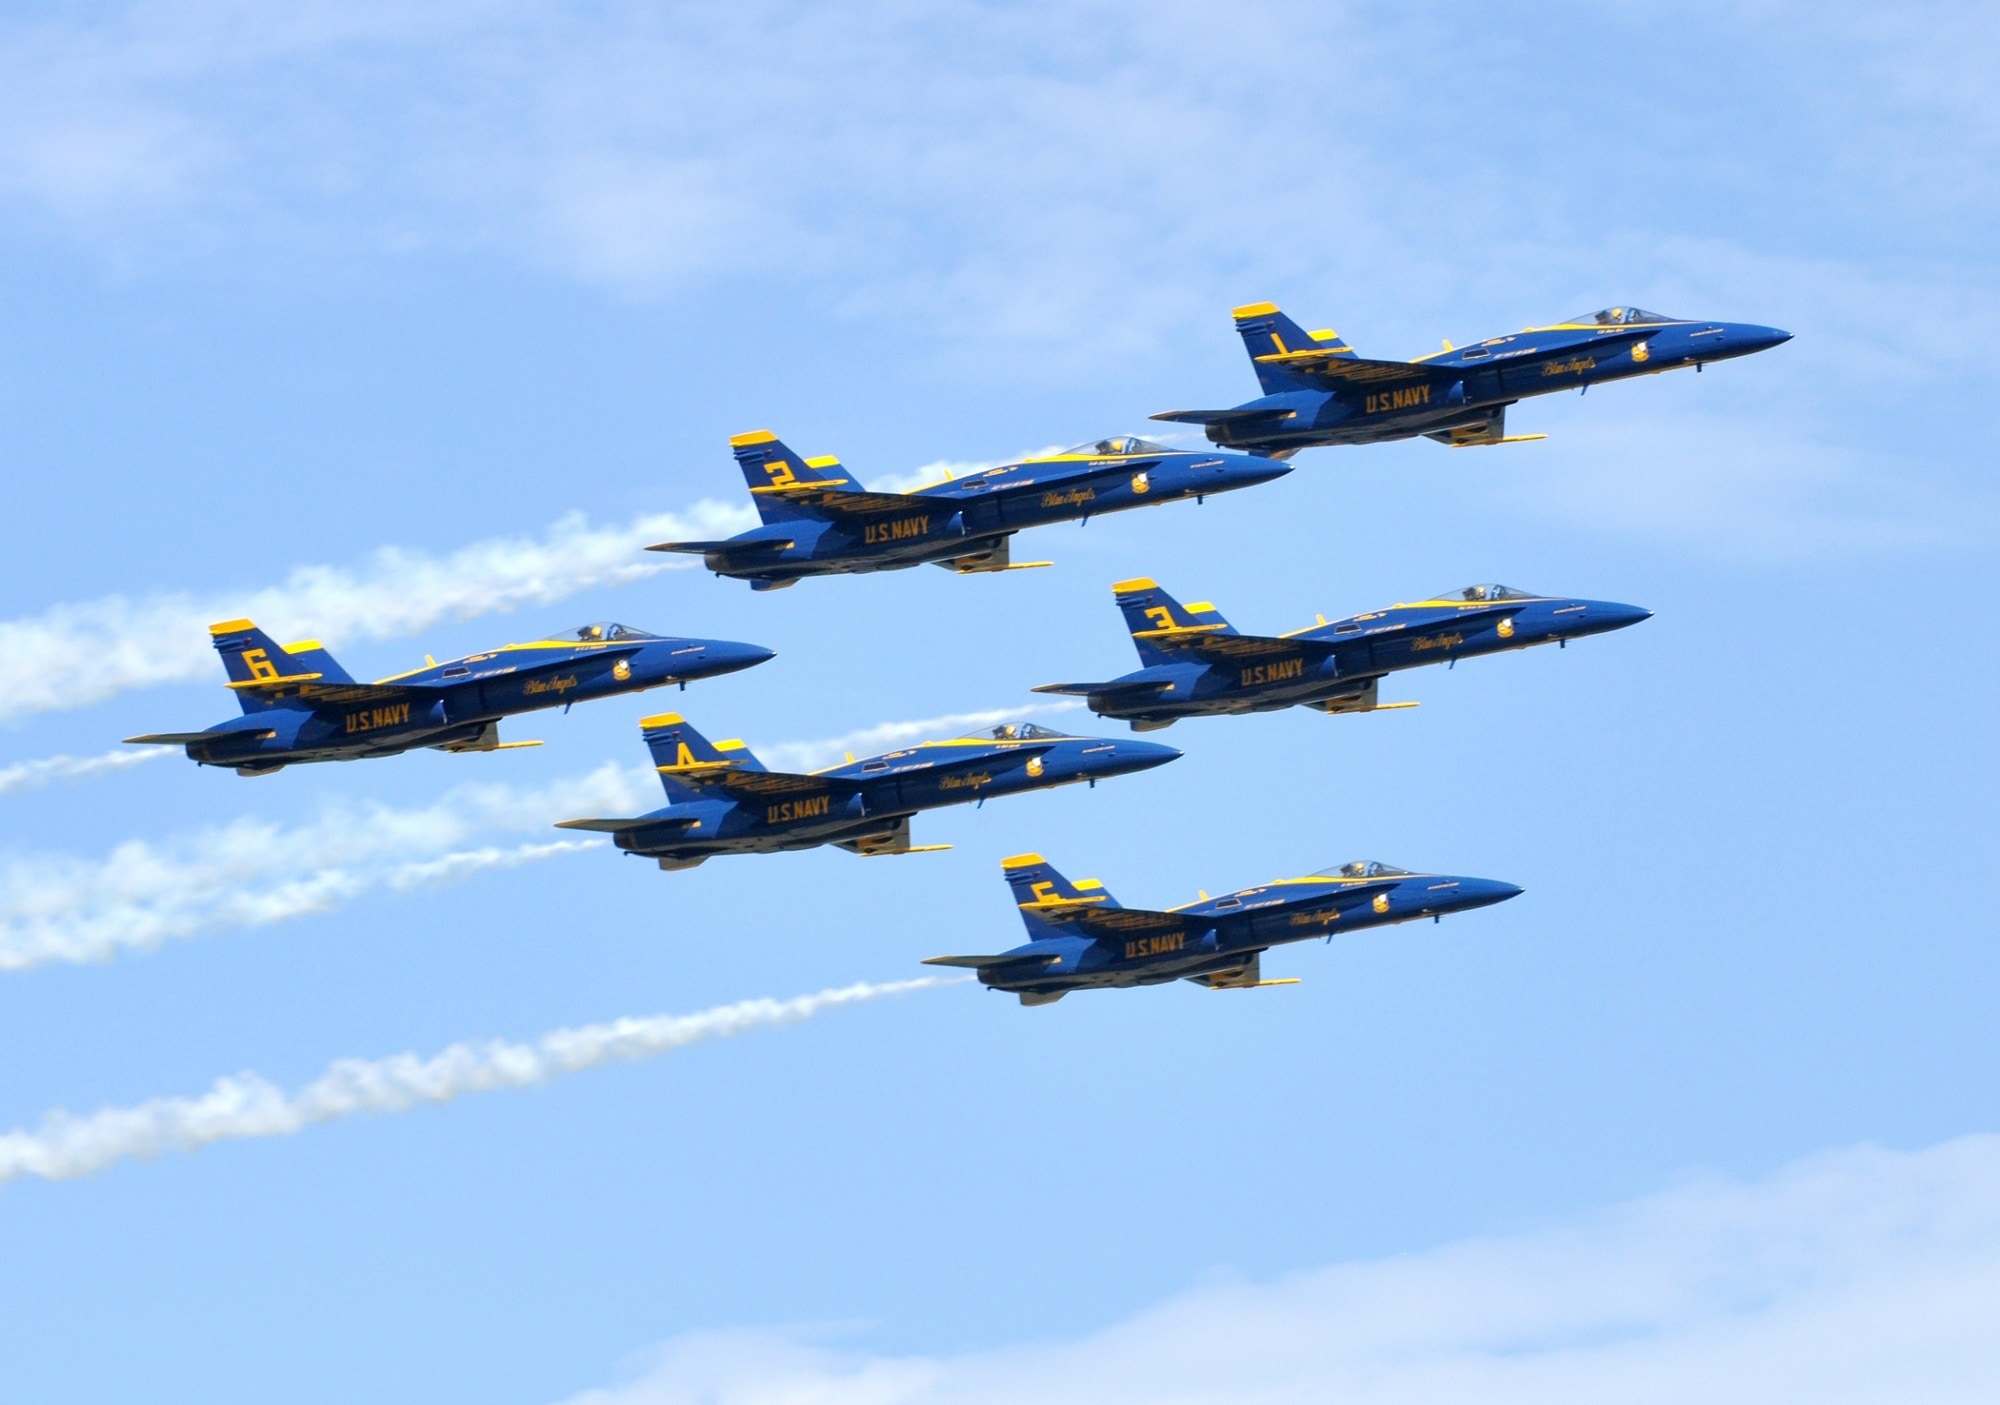 Navy, Precision, Blue Angels, Planes, airshow, military